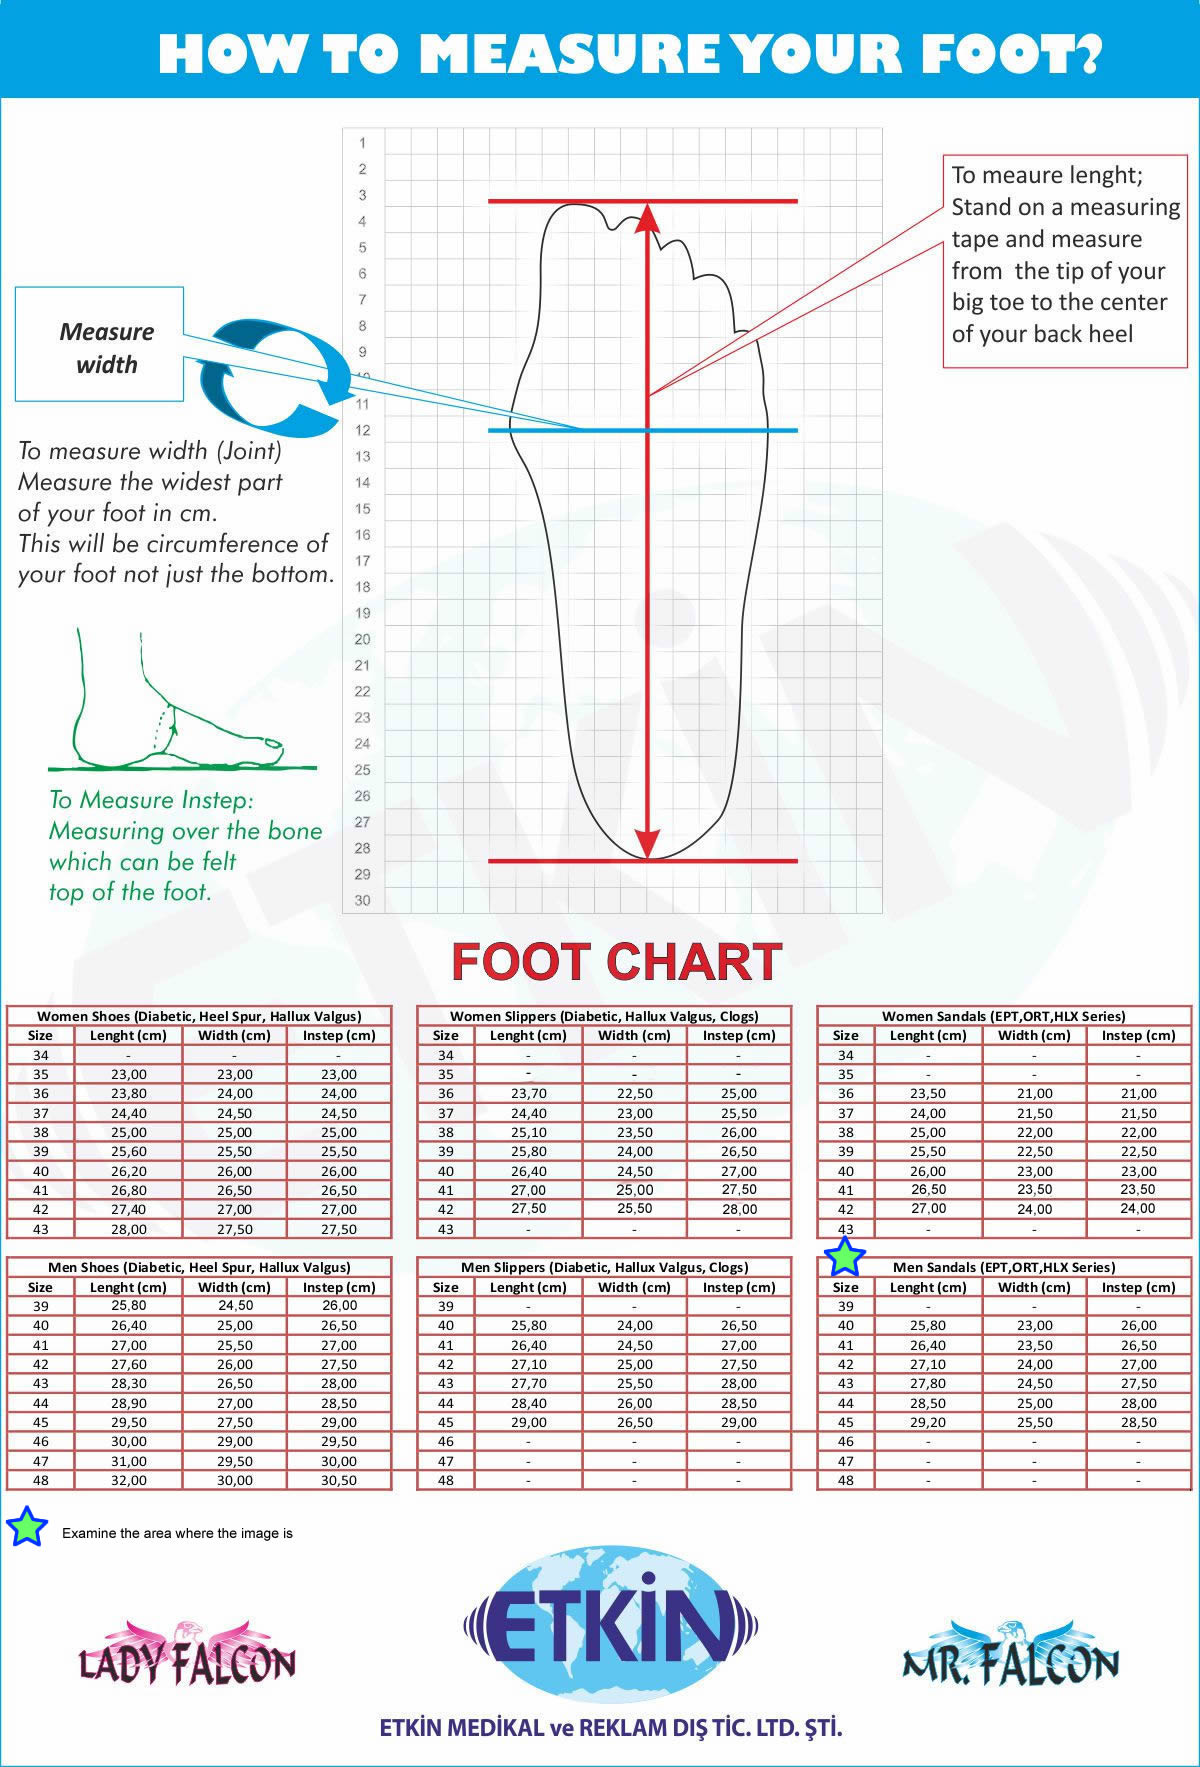 Men's clogs For Bunions and Heel spurs size chart